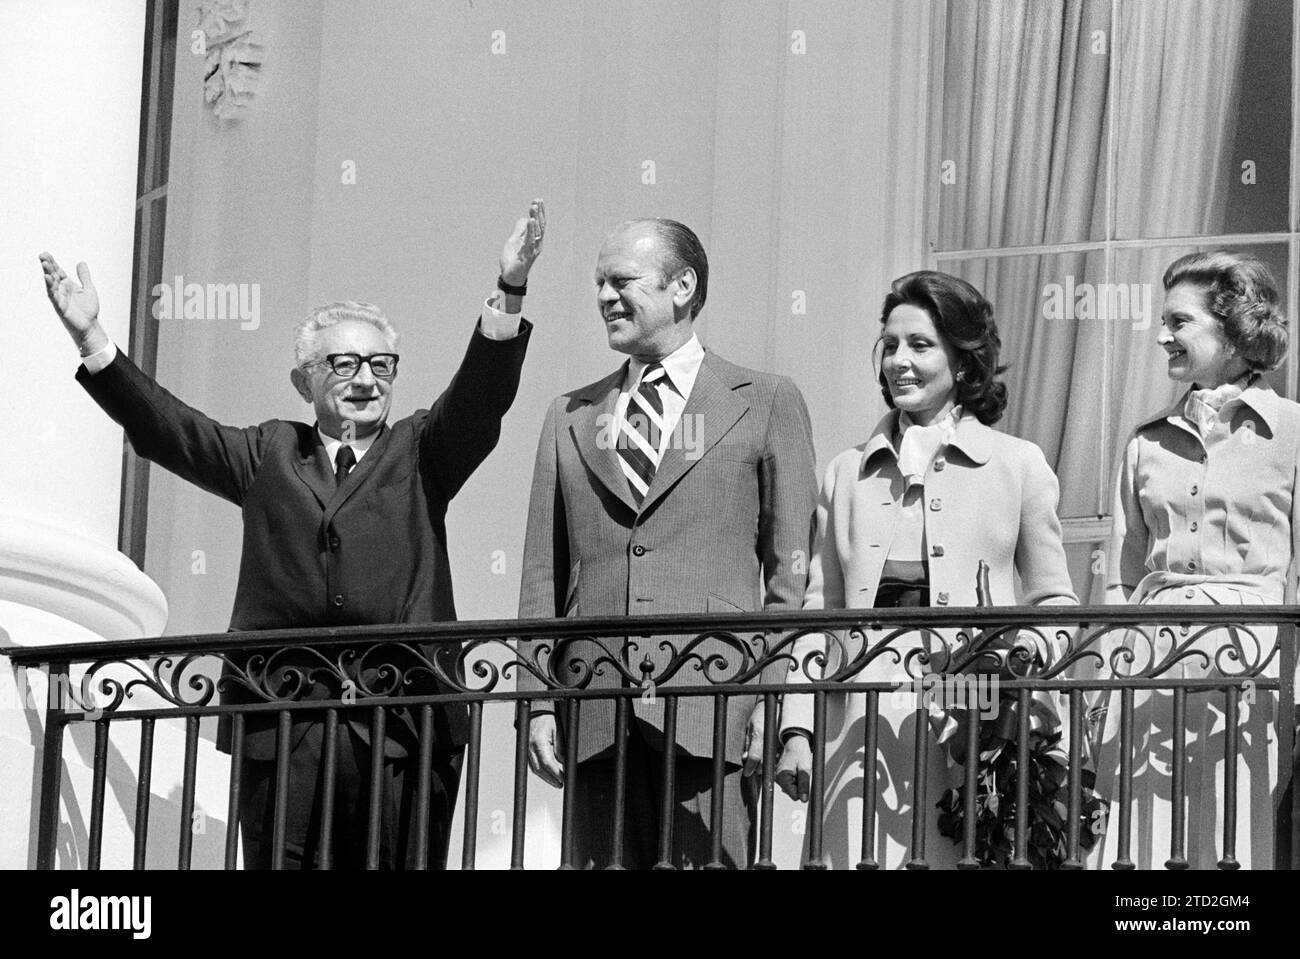 U.S. President Gerald Ford, First Lady Betty Ford, Italian President Giovanni Leone, and his wife Vittoria Michitto, waving from White House balcony upon arriving in U.S., Washington, D.C., USA, Marion S. Trikosko, U.S. News & World Report Magazine Photograph Collection, September 24, 1974 Stock Photo